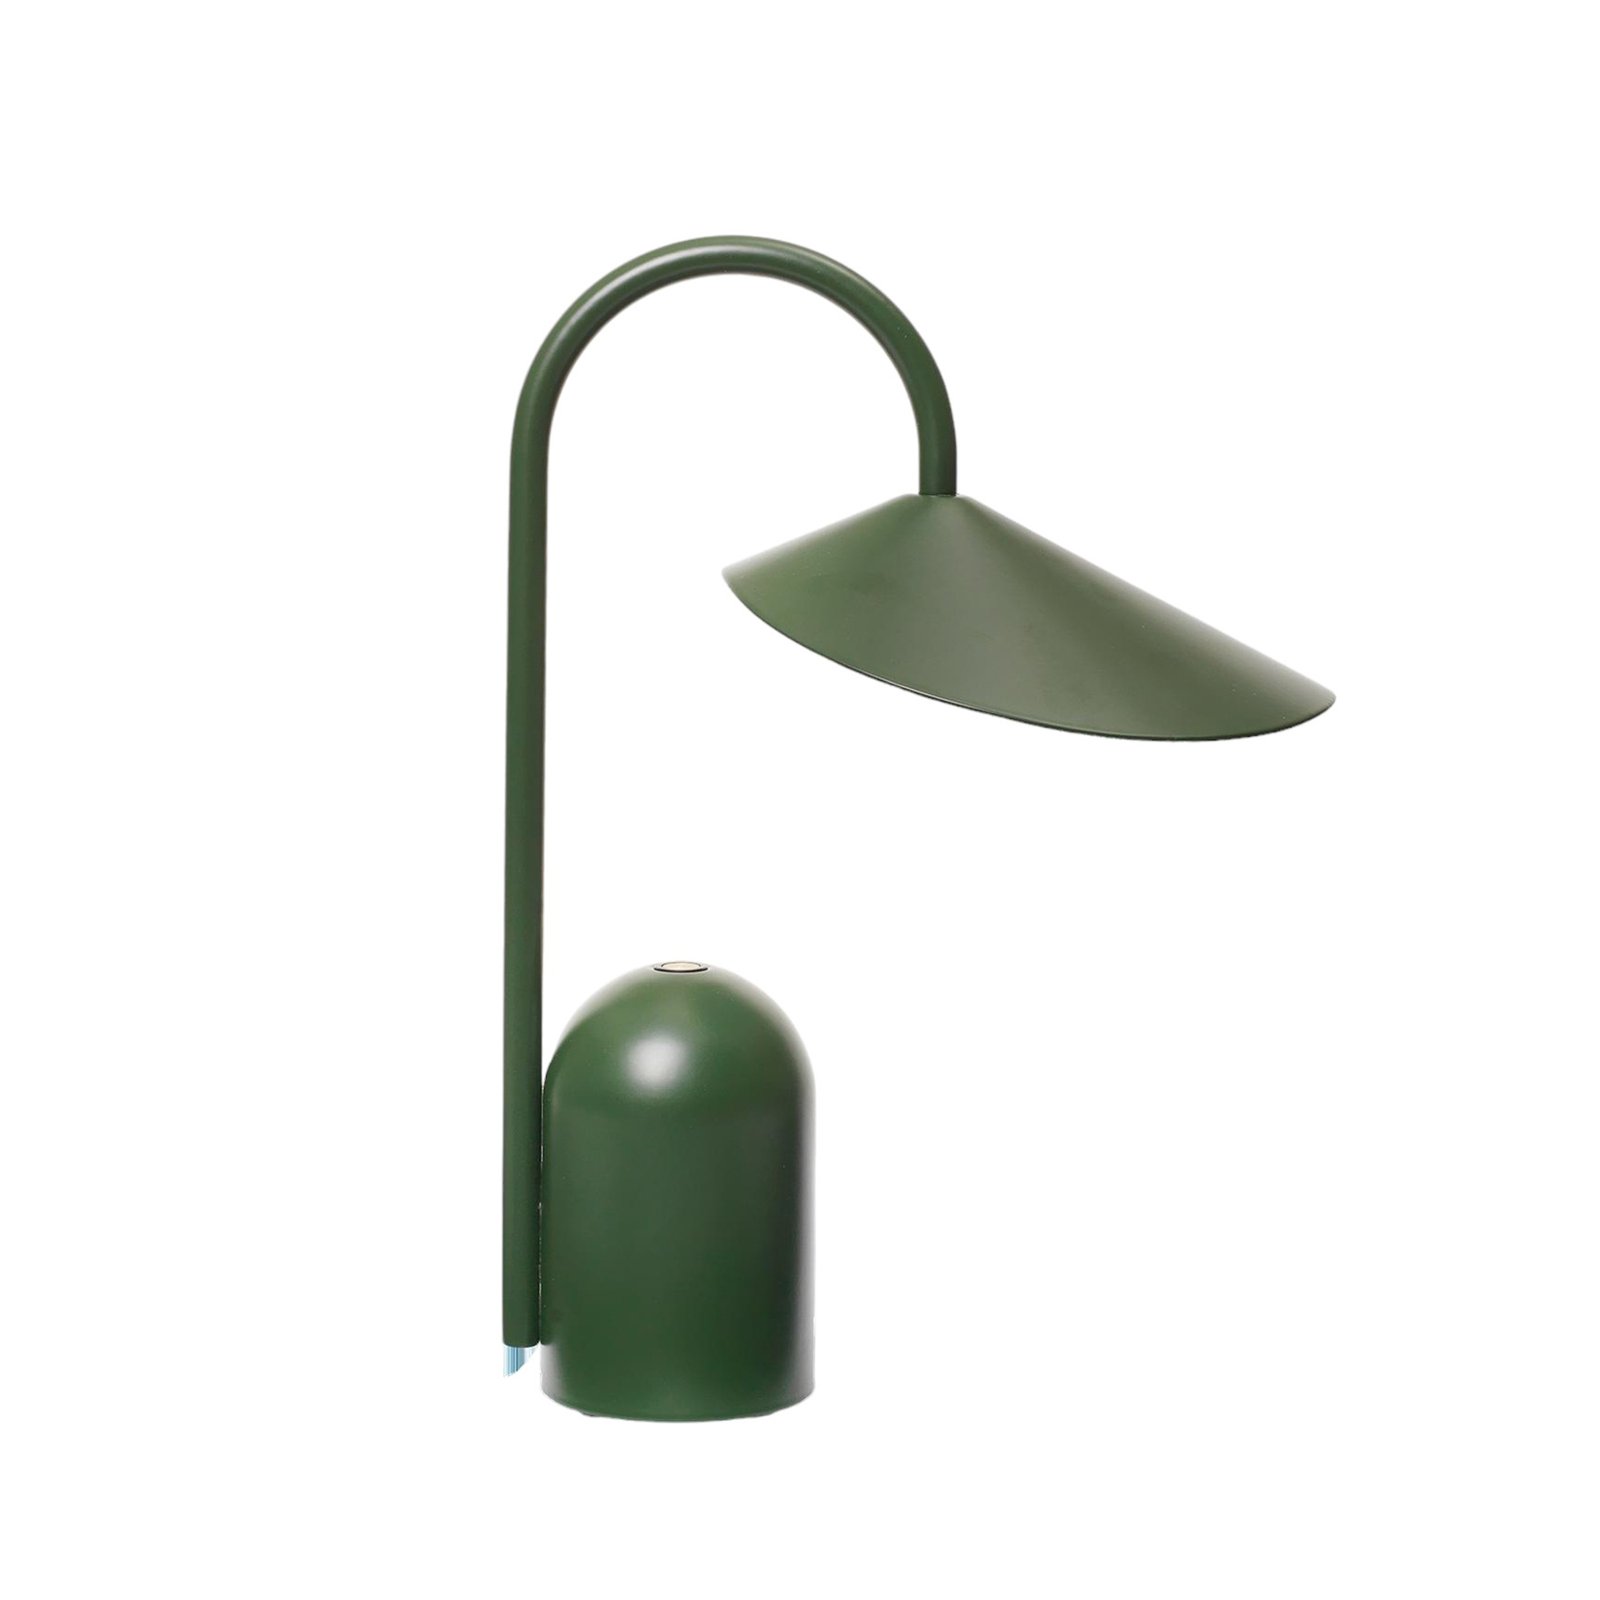 ferm LIVING LED table lamp Arum, green, dimmable, IP44